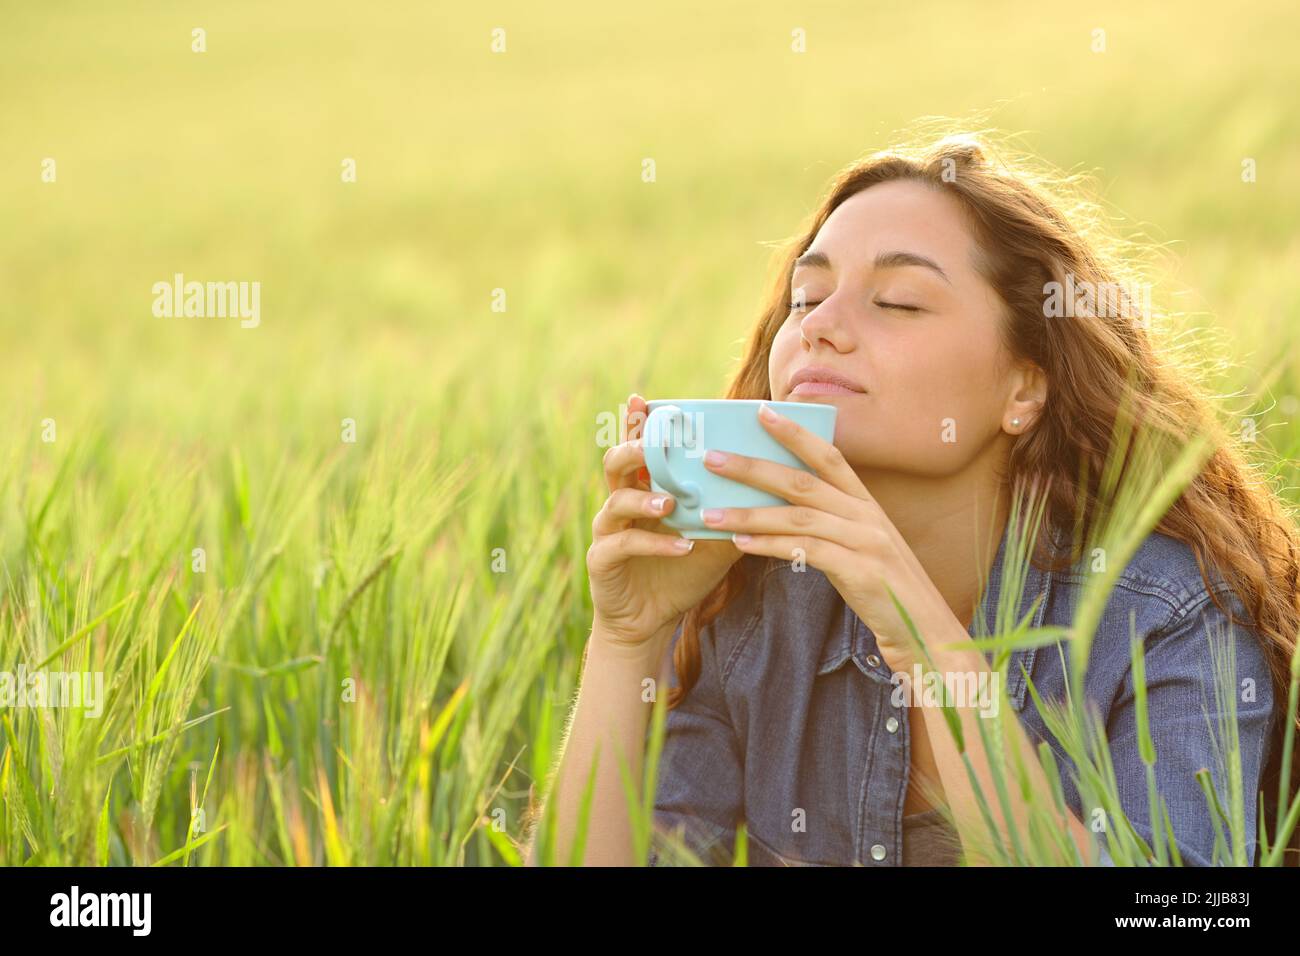 Relaxed woman enjoying holding coffee cup sitting in a wheat field Stock Photo